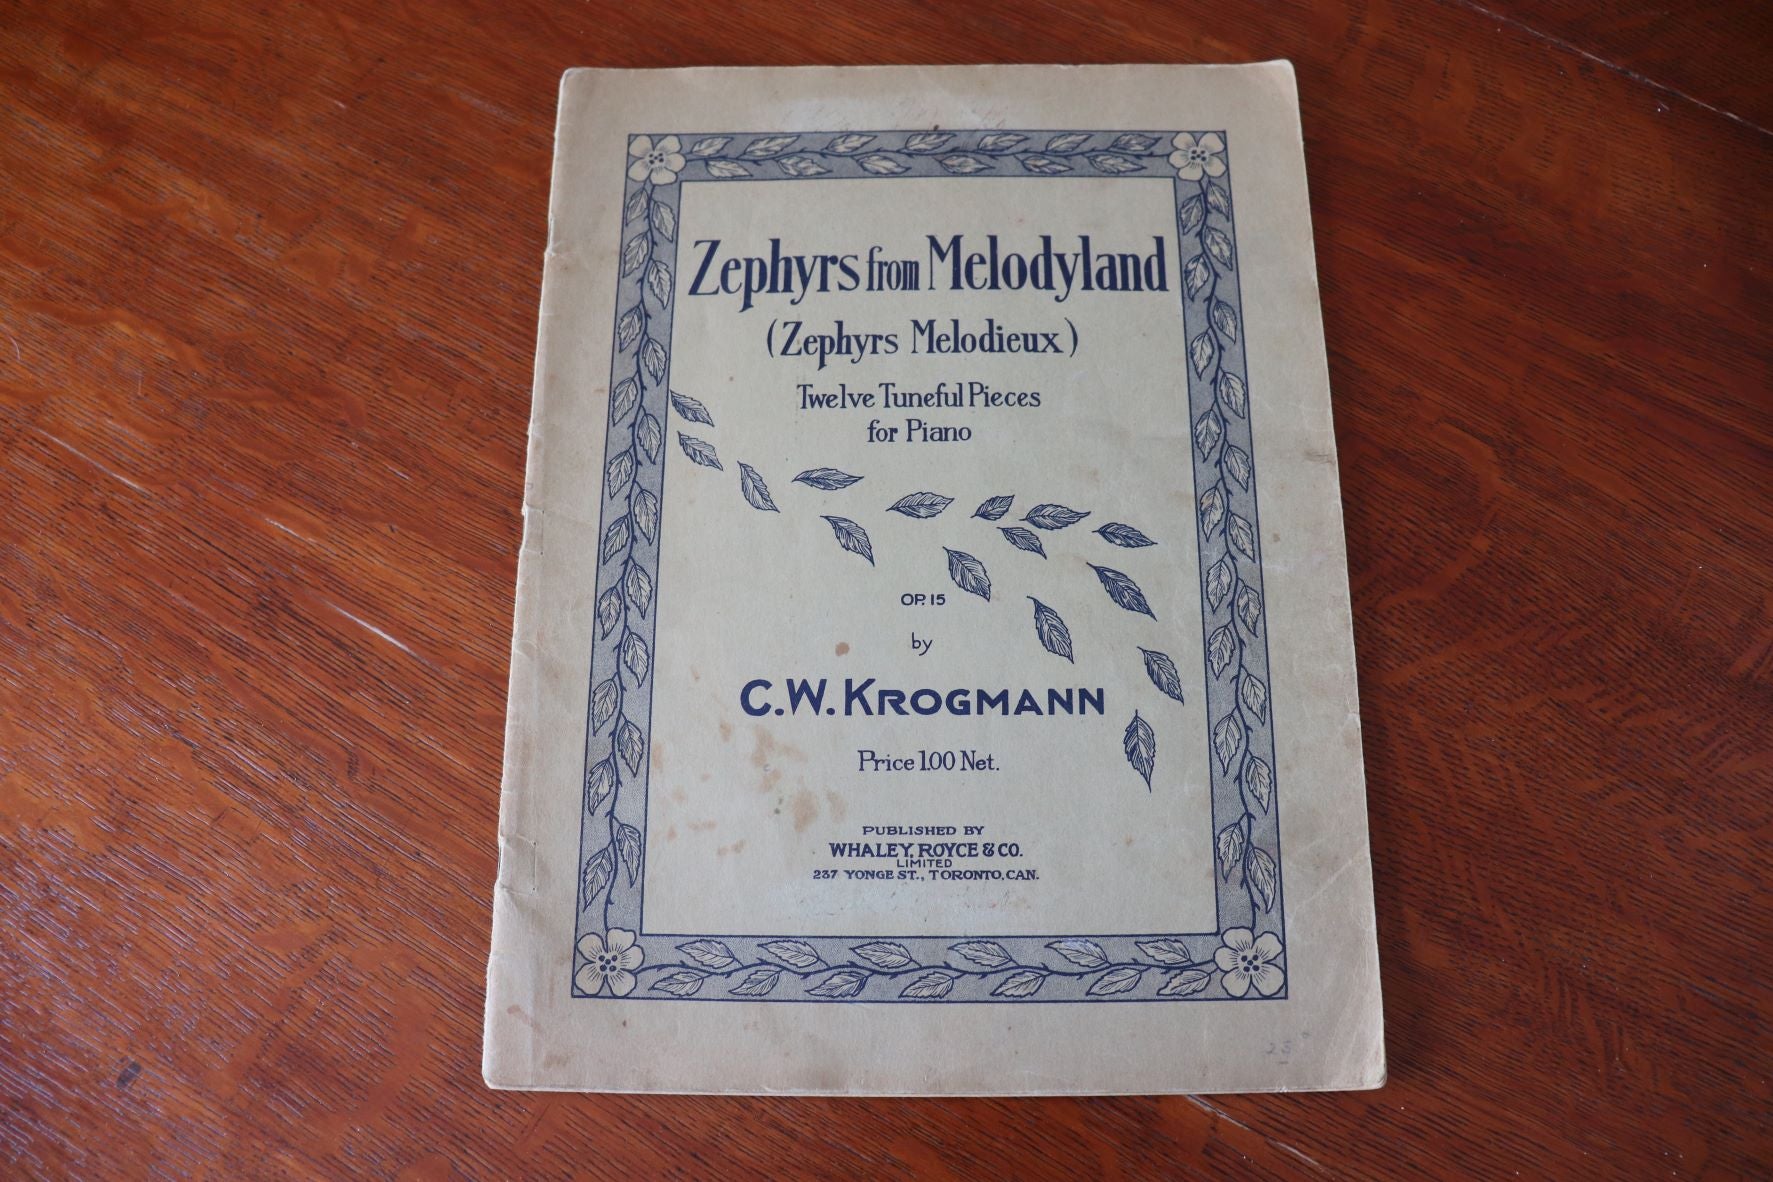 Vintage Sheet Music - Zephyrs From Melodyland - 1926